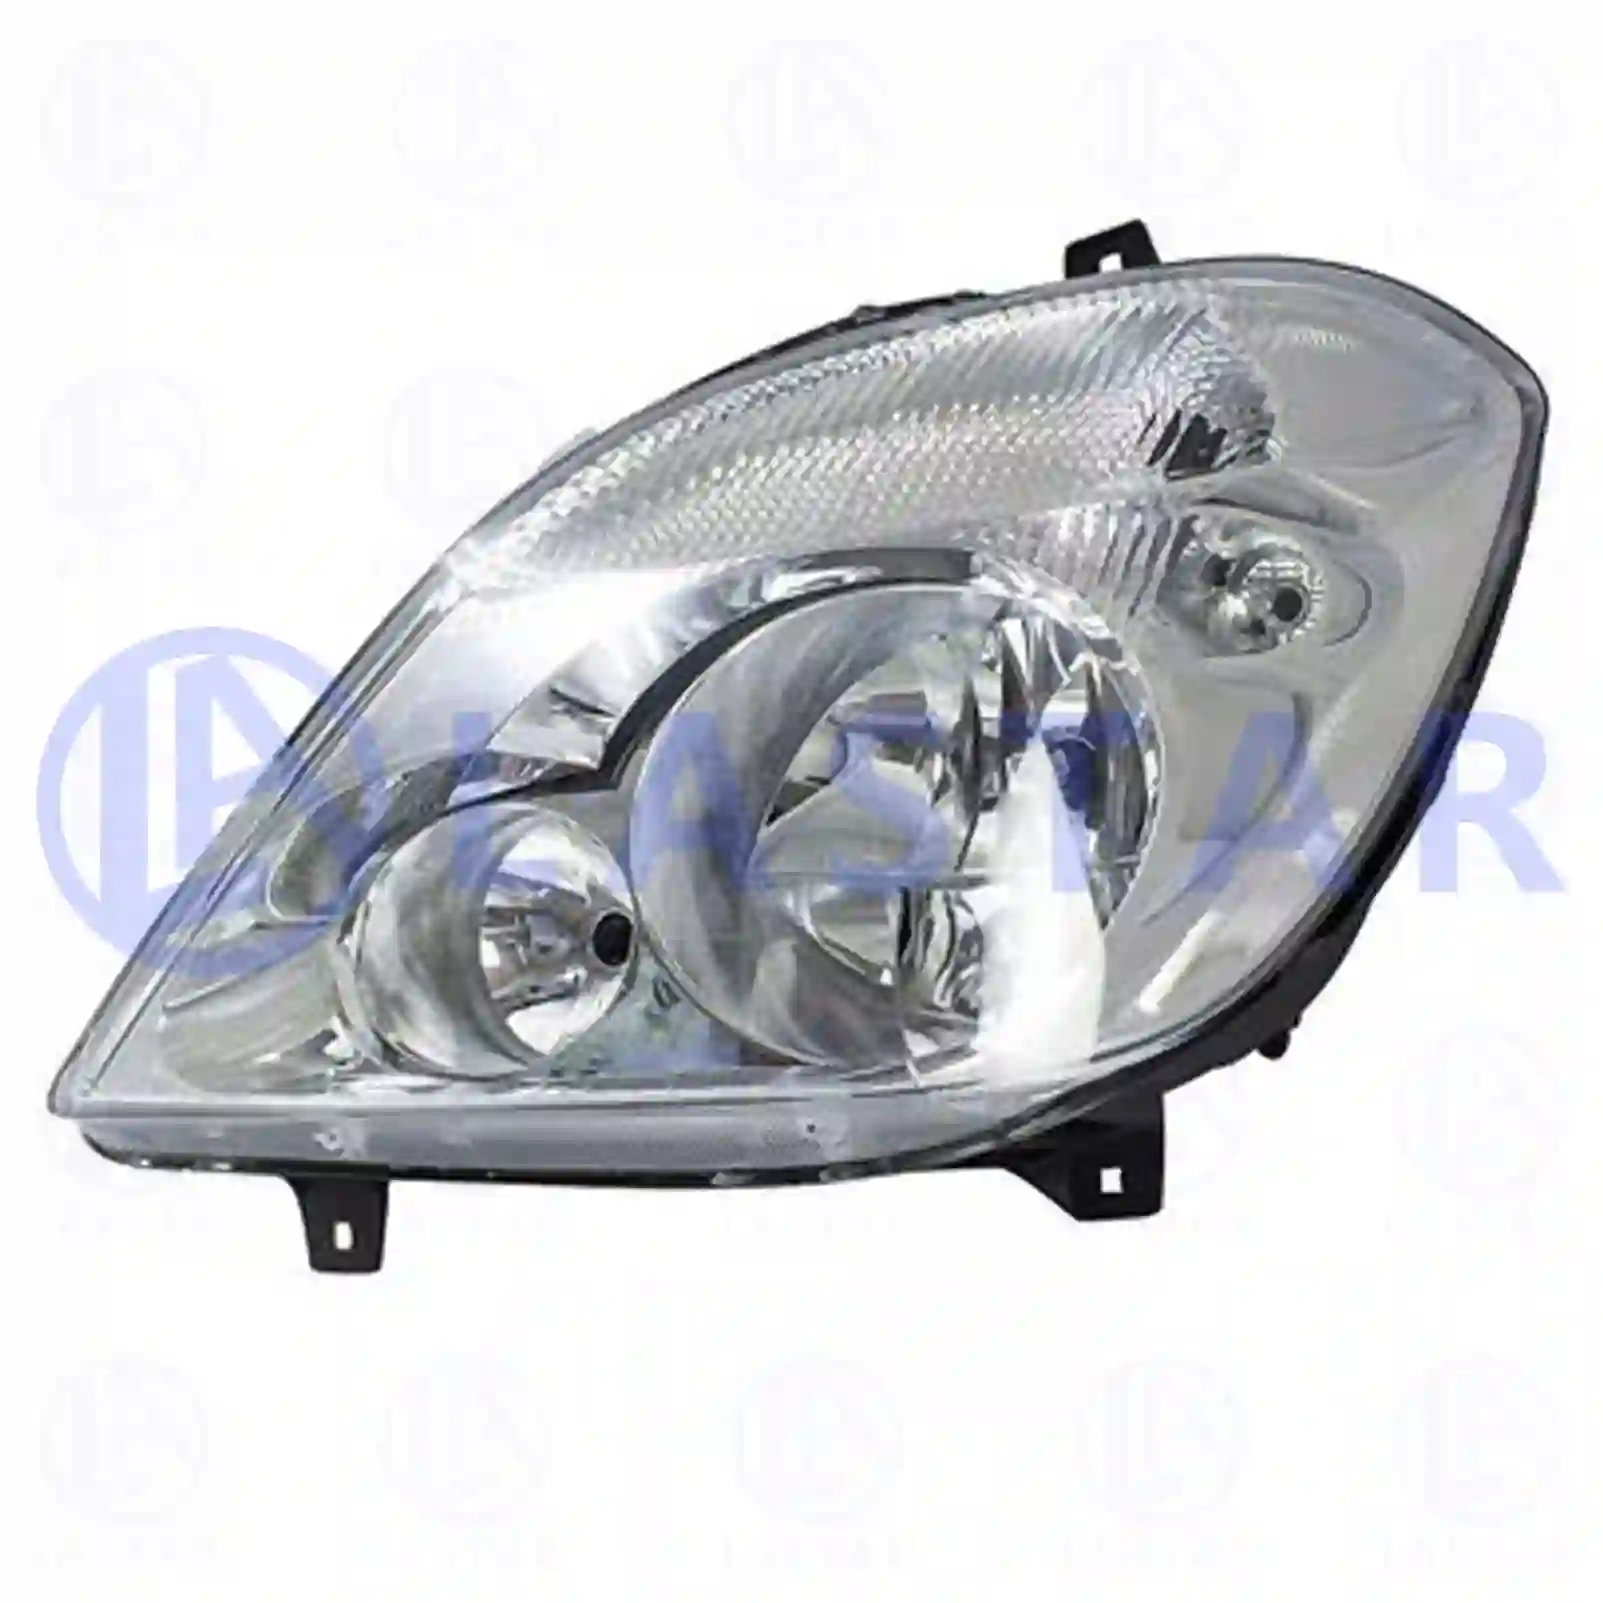 Headlamp, left, without bulbs, with fog lamp, 77712023, 9068200561, , , , , , , ||  77712023 Lastar Spare Part | Truck Spare Parts, Auotomotive Spare Parts Headlamp, left, without bulbs, with fog lamp, 77712023, 9068200561, , , , , , , ||  77712023 Lastar Spare Part | Truck Spare Parts, Auotomotive Spare Parts